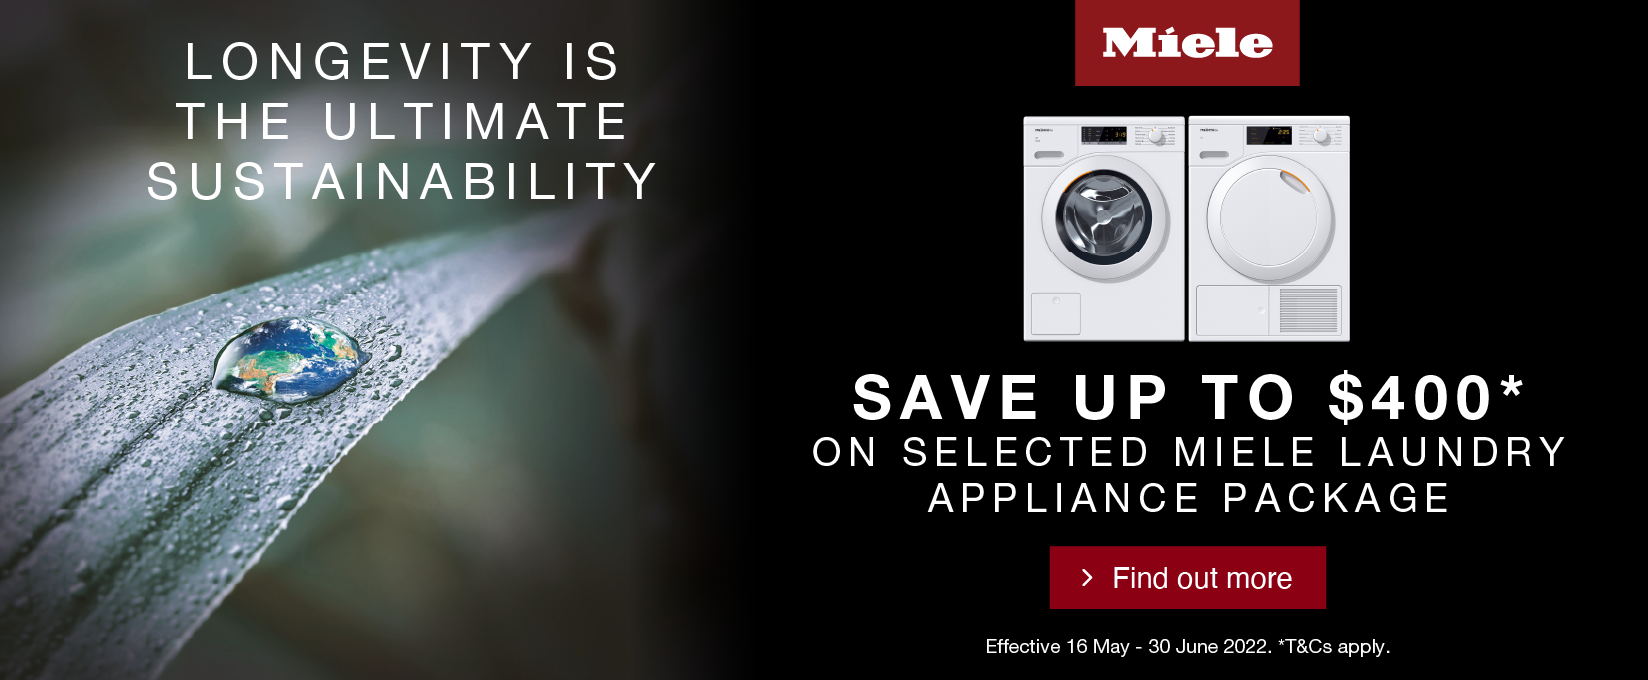 Save Up To $400 On Selected Miele Laundry Packages at Retravision